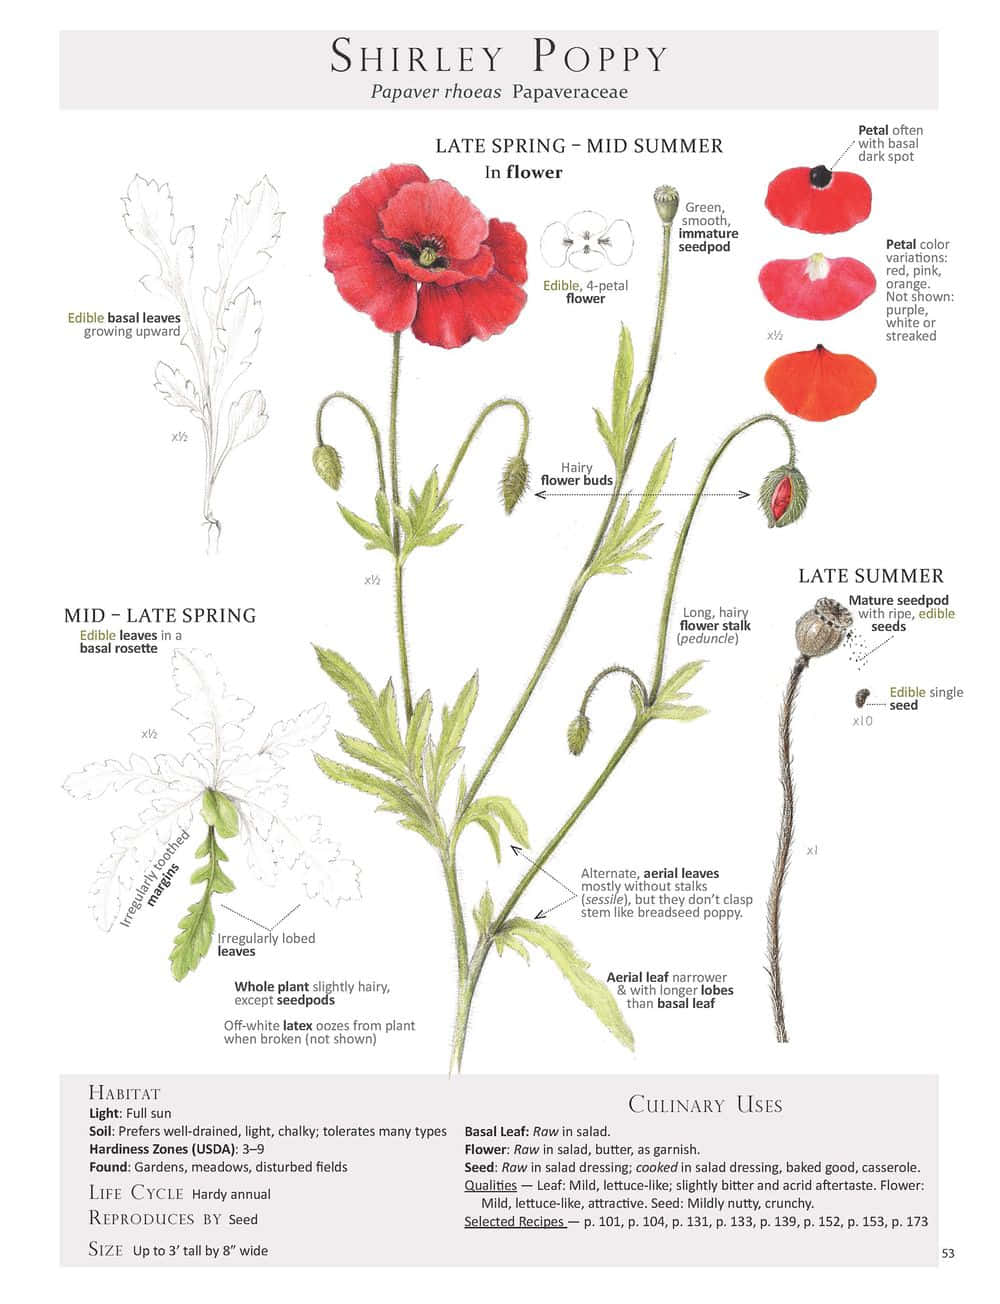 A Poster Showing The Different Types Of Poppies